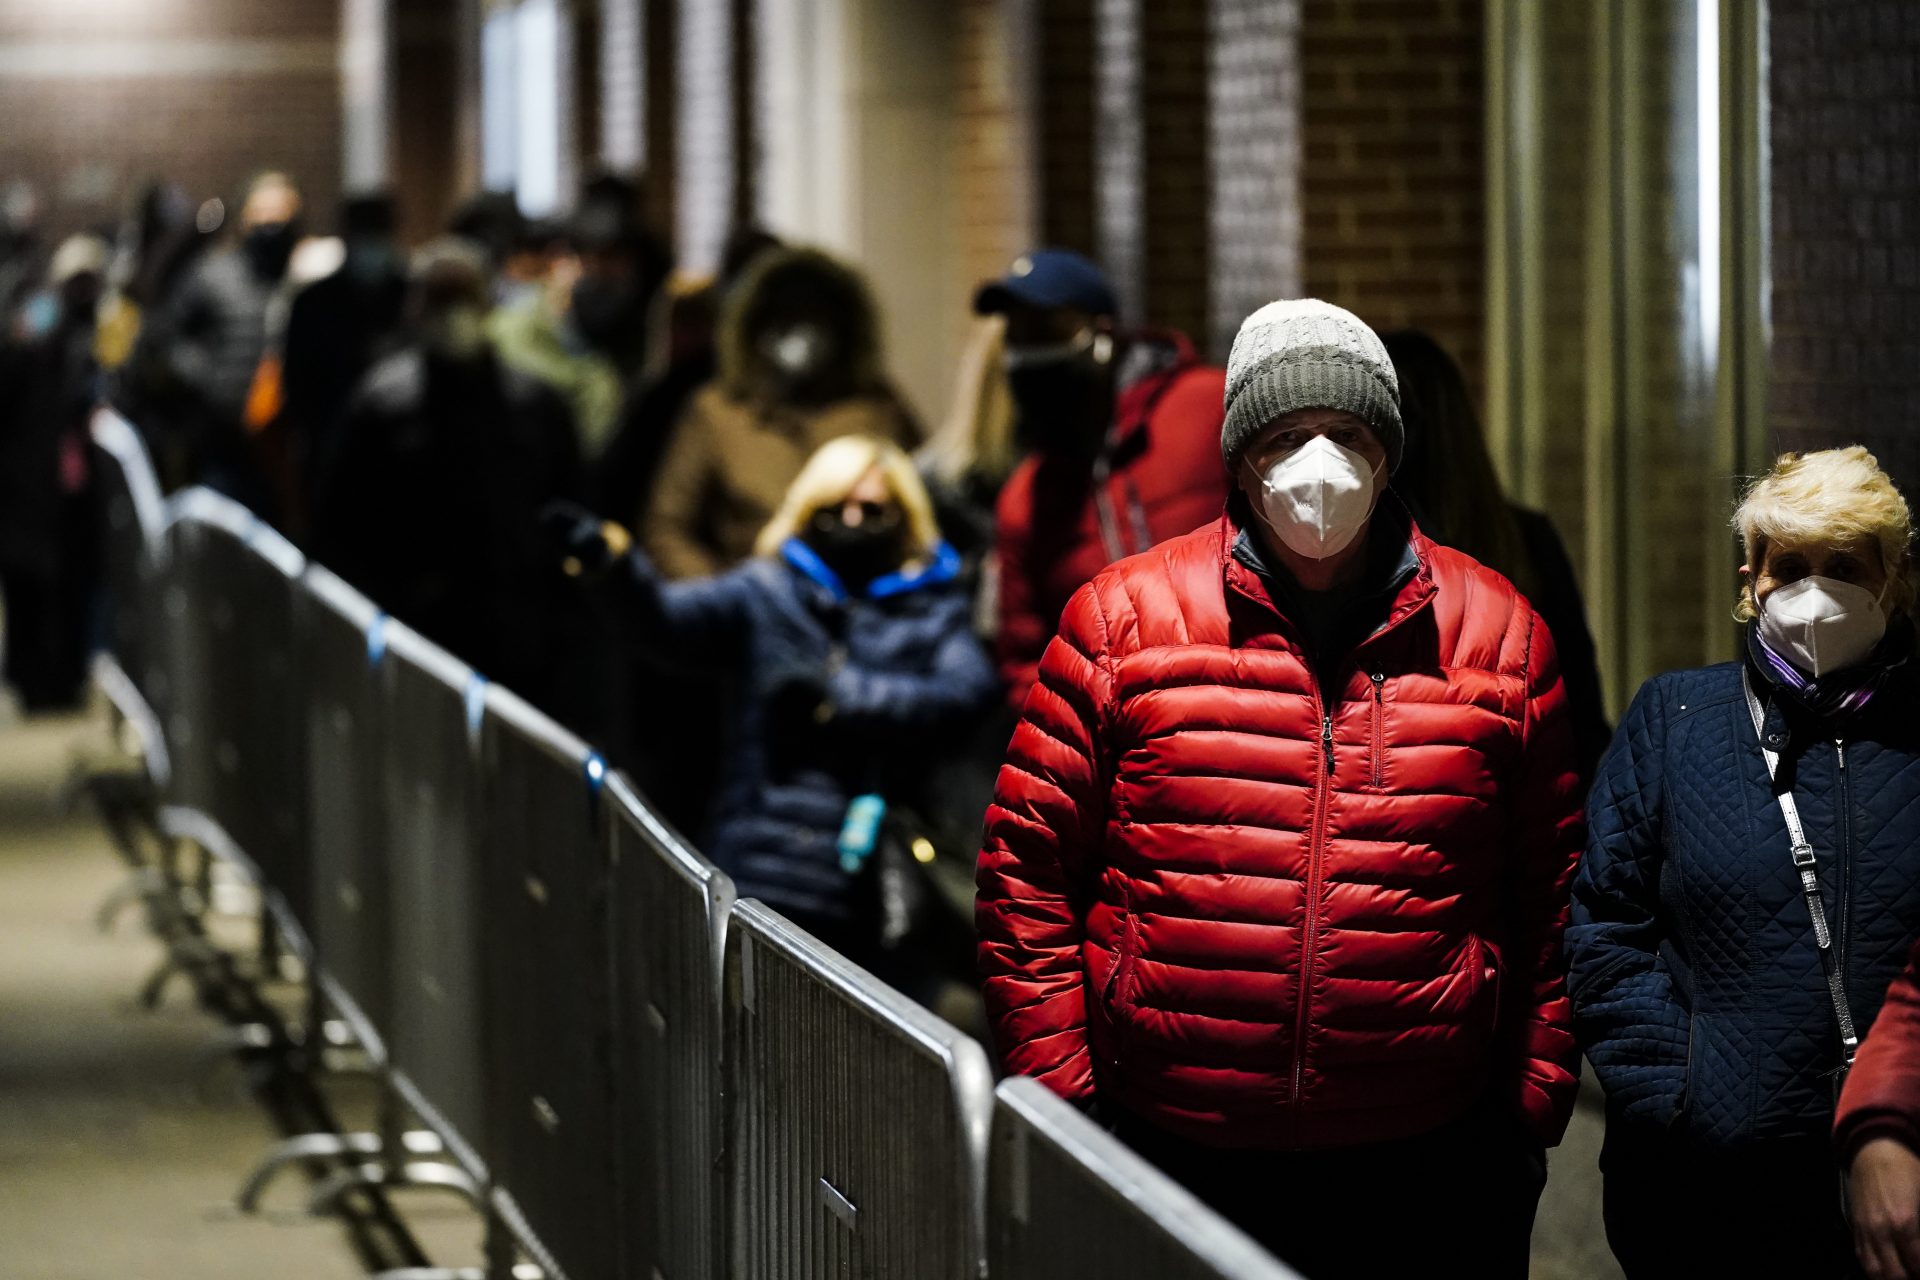 People wait in line at a FEMA Community Vaccination Center at the Pennsylvania Convention Center in Philadelphia, Wednesday, March 3, 2021.